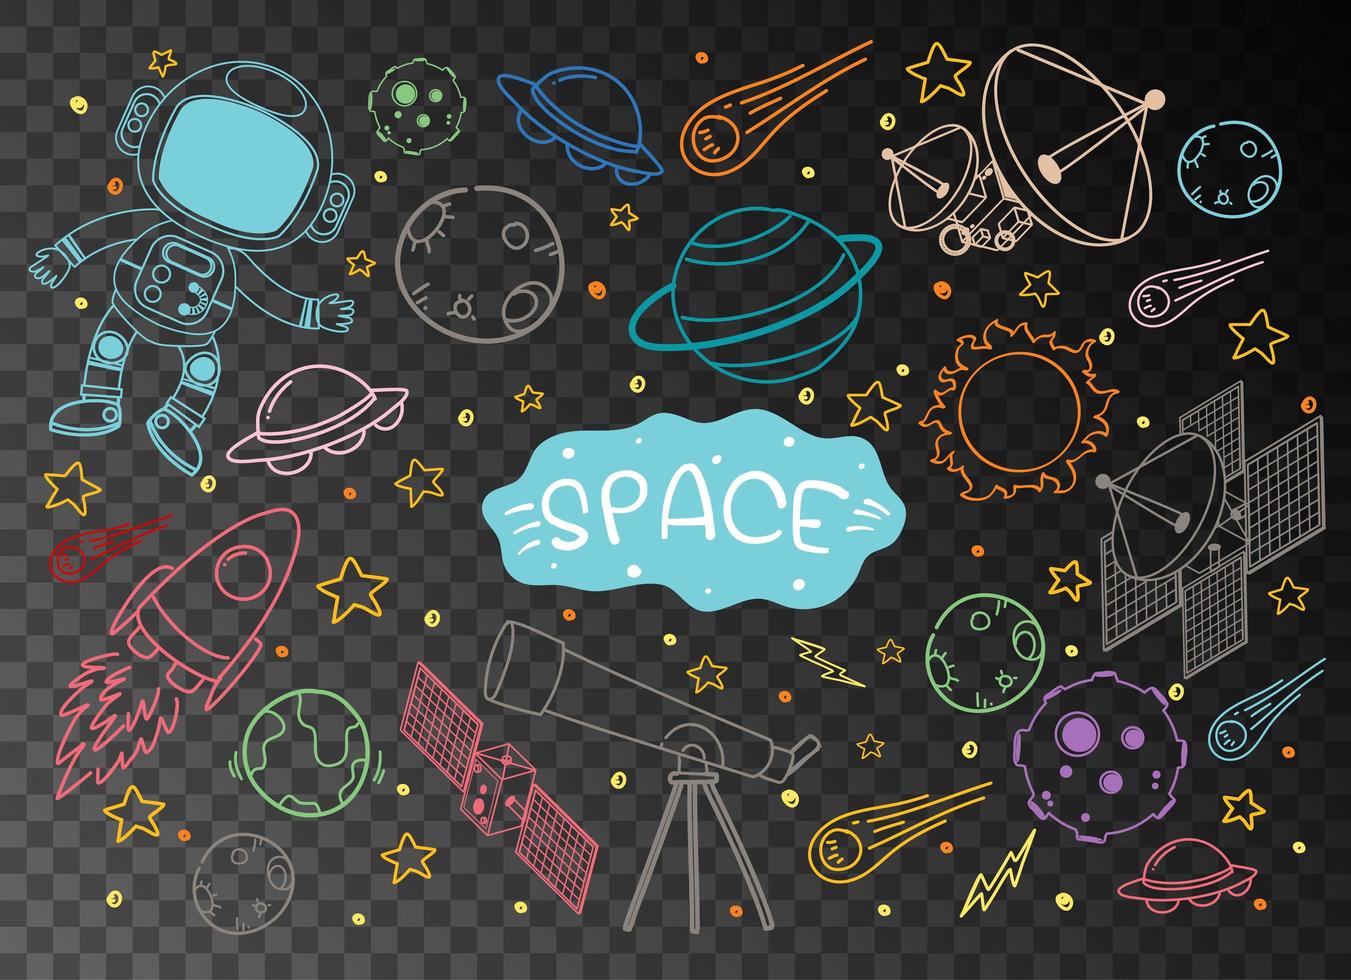 Space element in doodle or sketch style vector